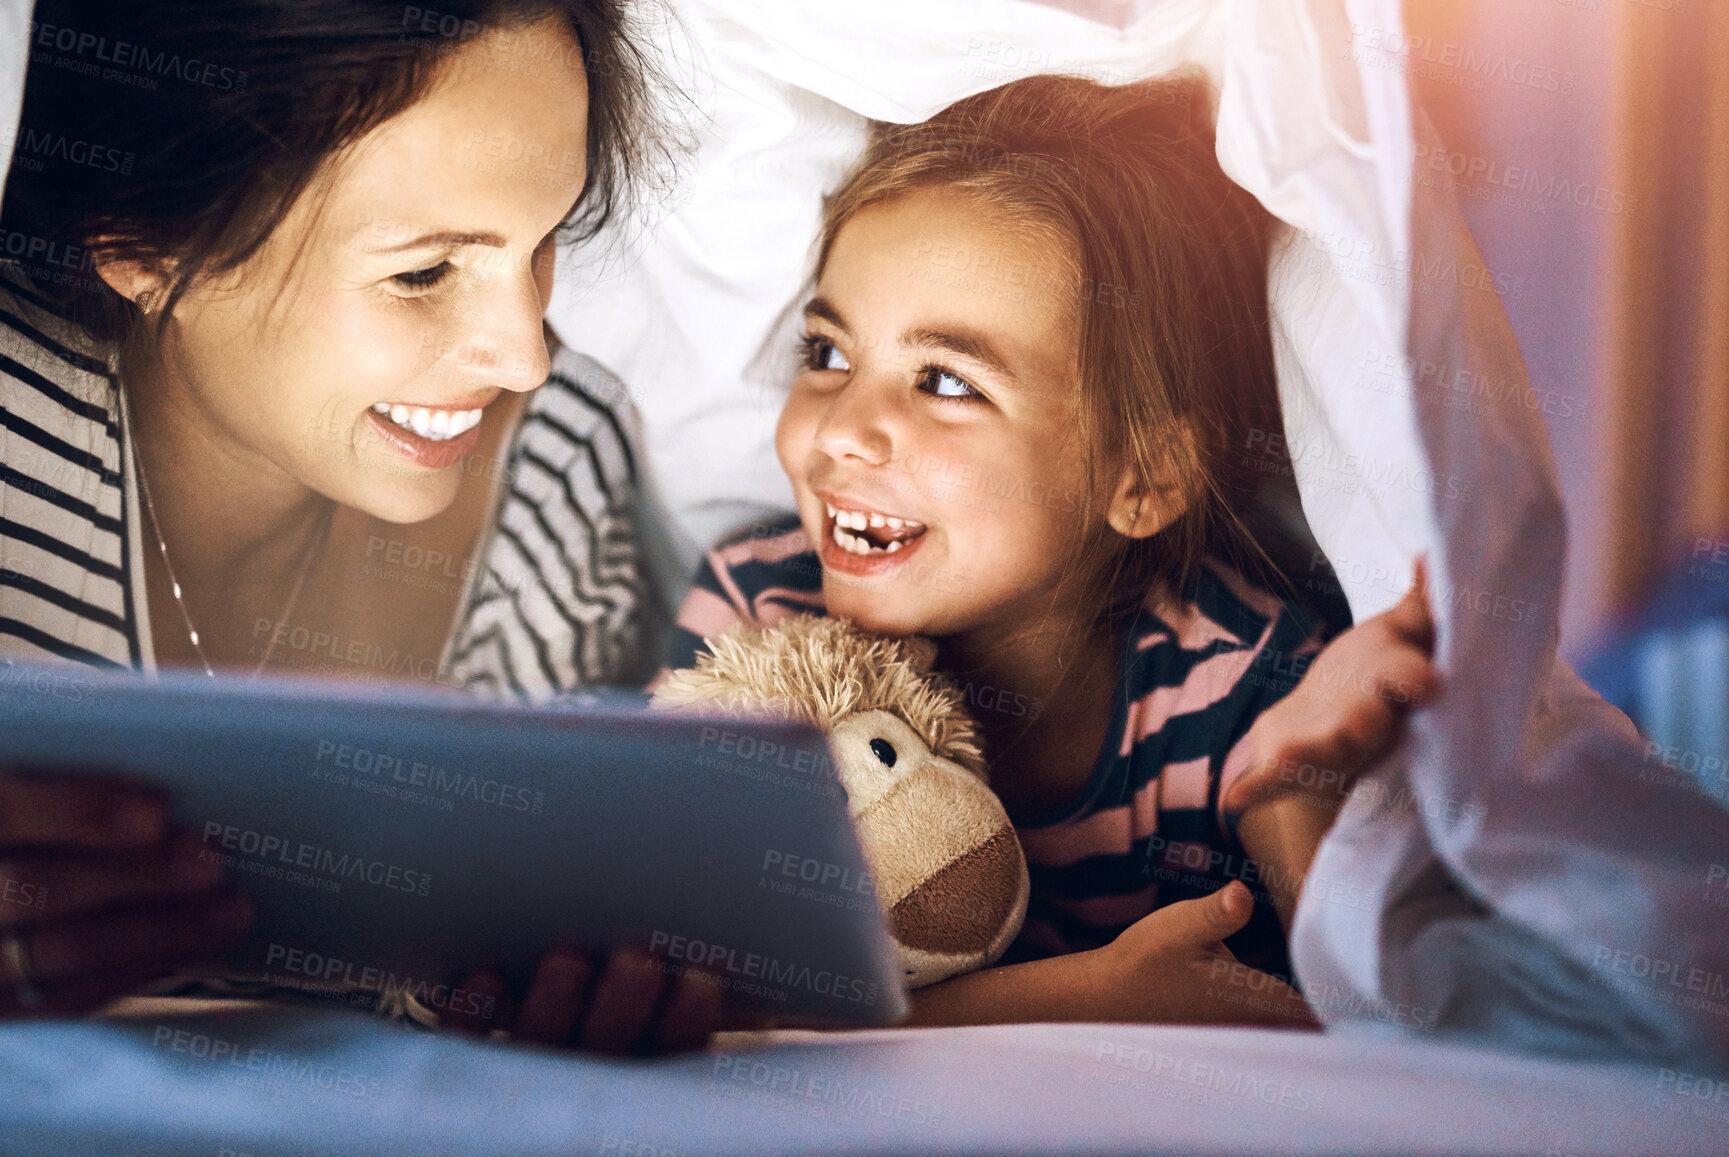 Buy stock photo Cropped shot of an attractive young pregnant woman reading her daughter a bedtime story on a tablet